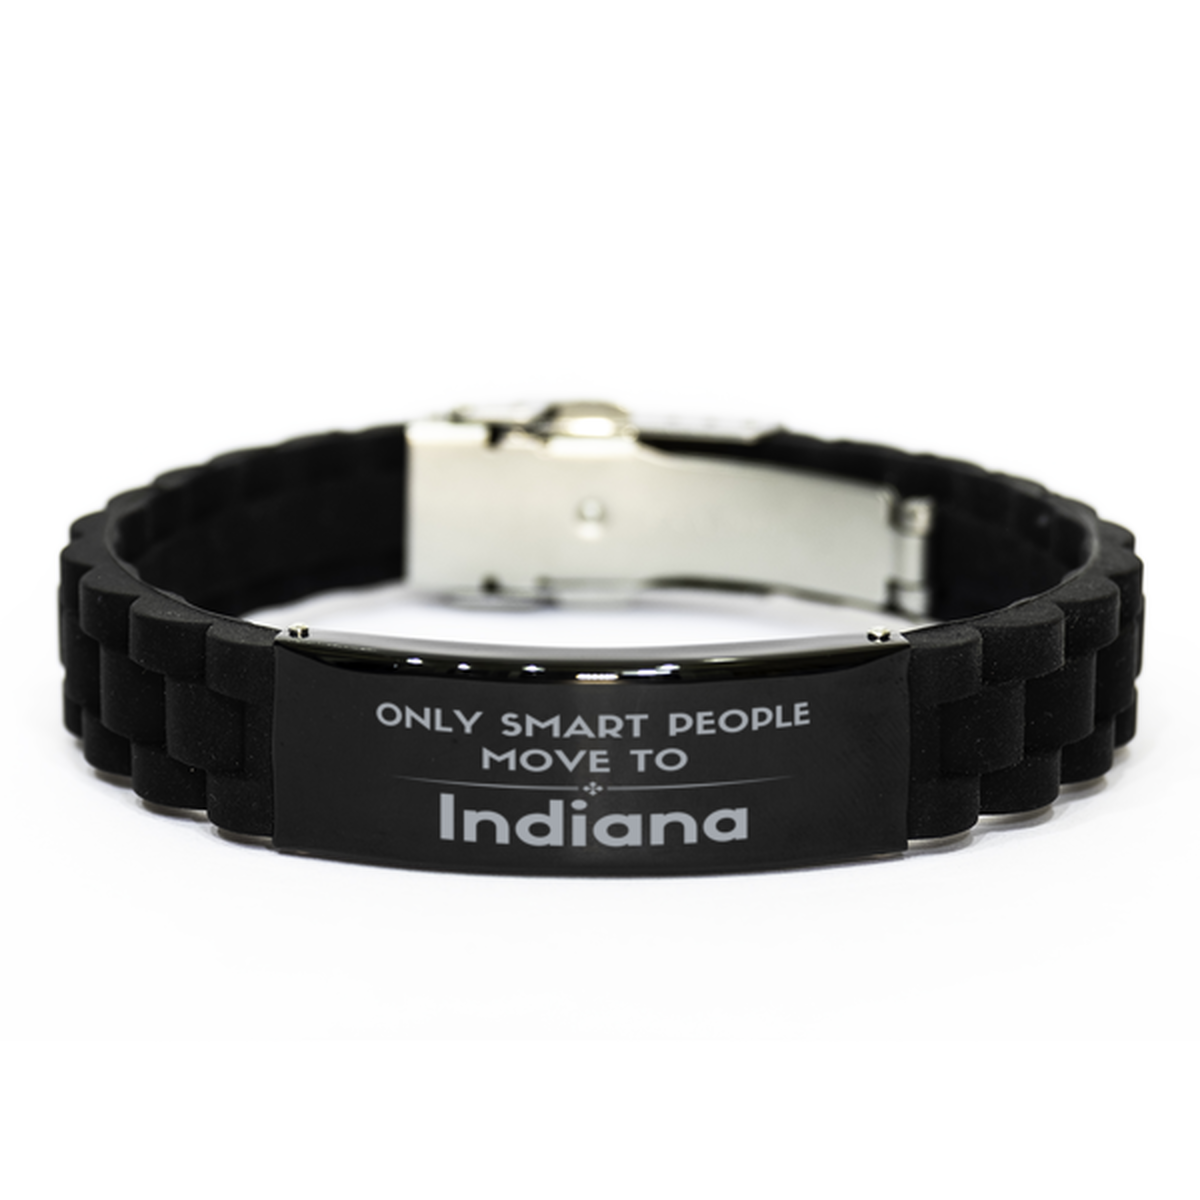 Only smart people move to Indiana Black Glidelock Clasp Bracelet, Gag Gifts For Indiana, Move to Indiana Gifts for Friends Coworker Funny Saying Quote